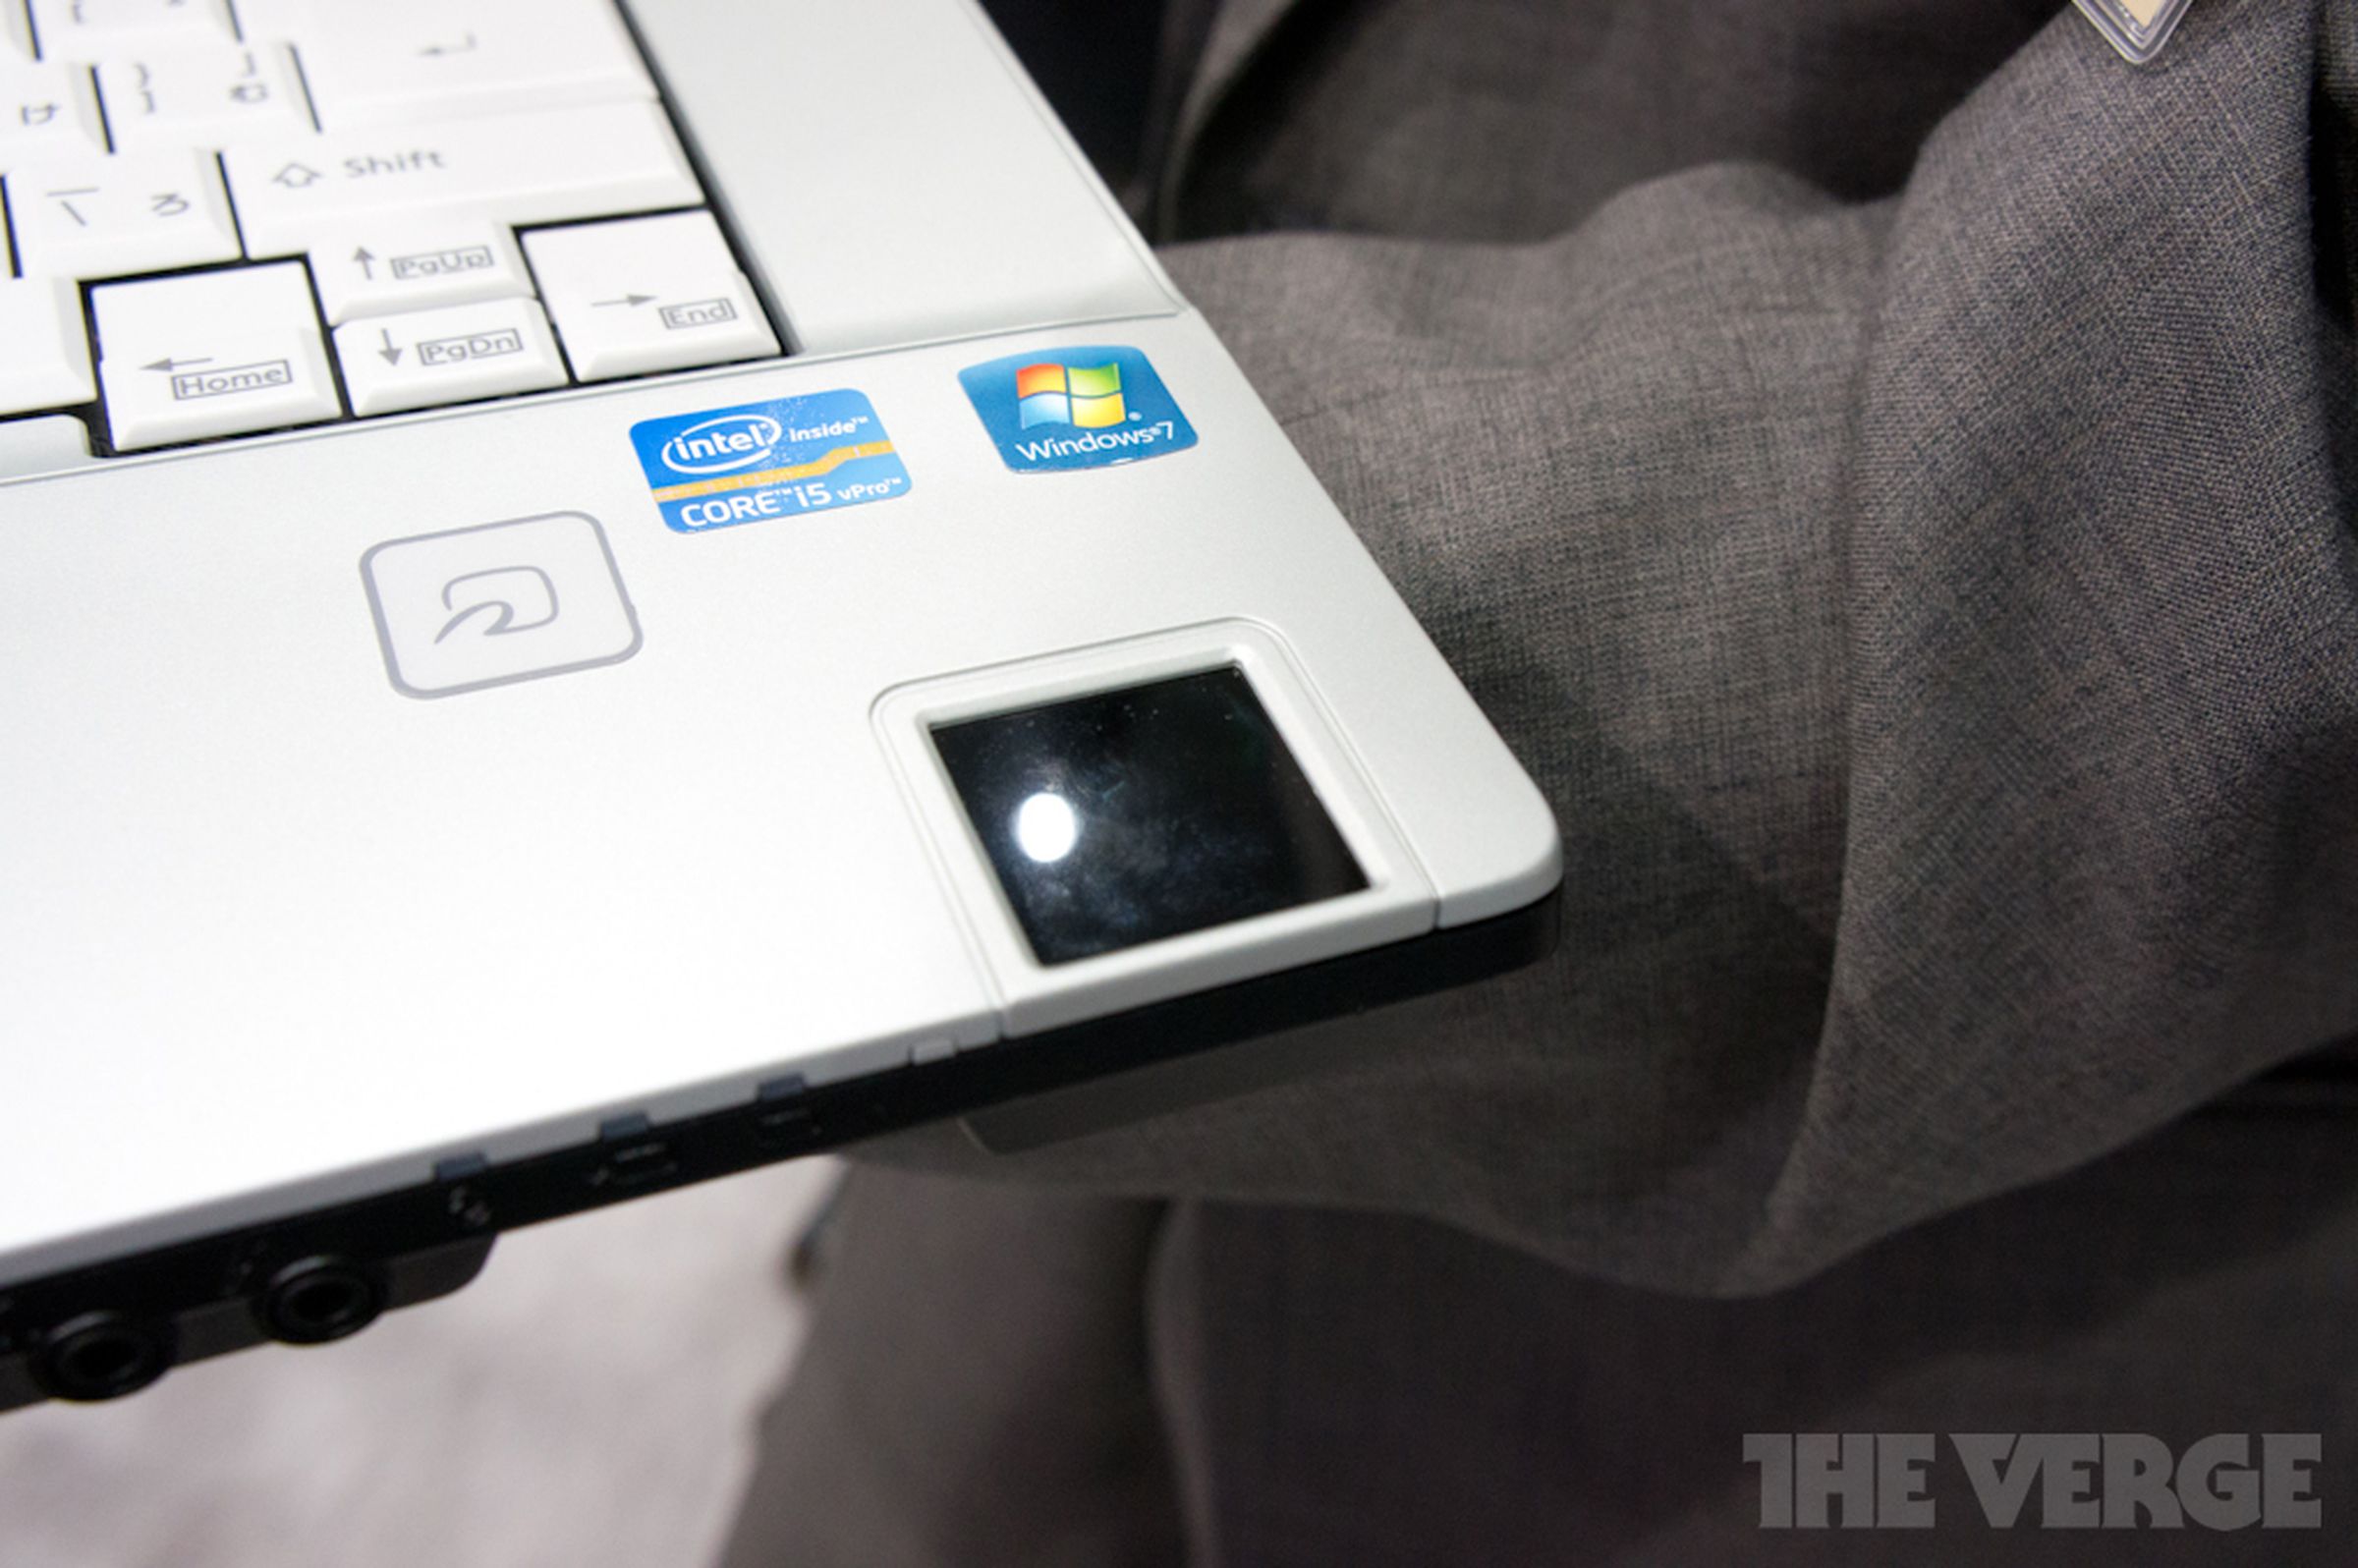 Fujitsu palm scanning authentication for laptops hands-on gallery